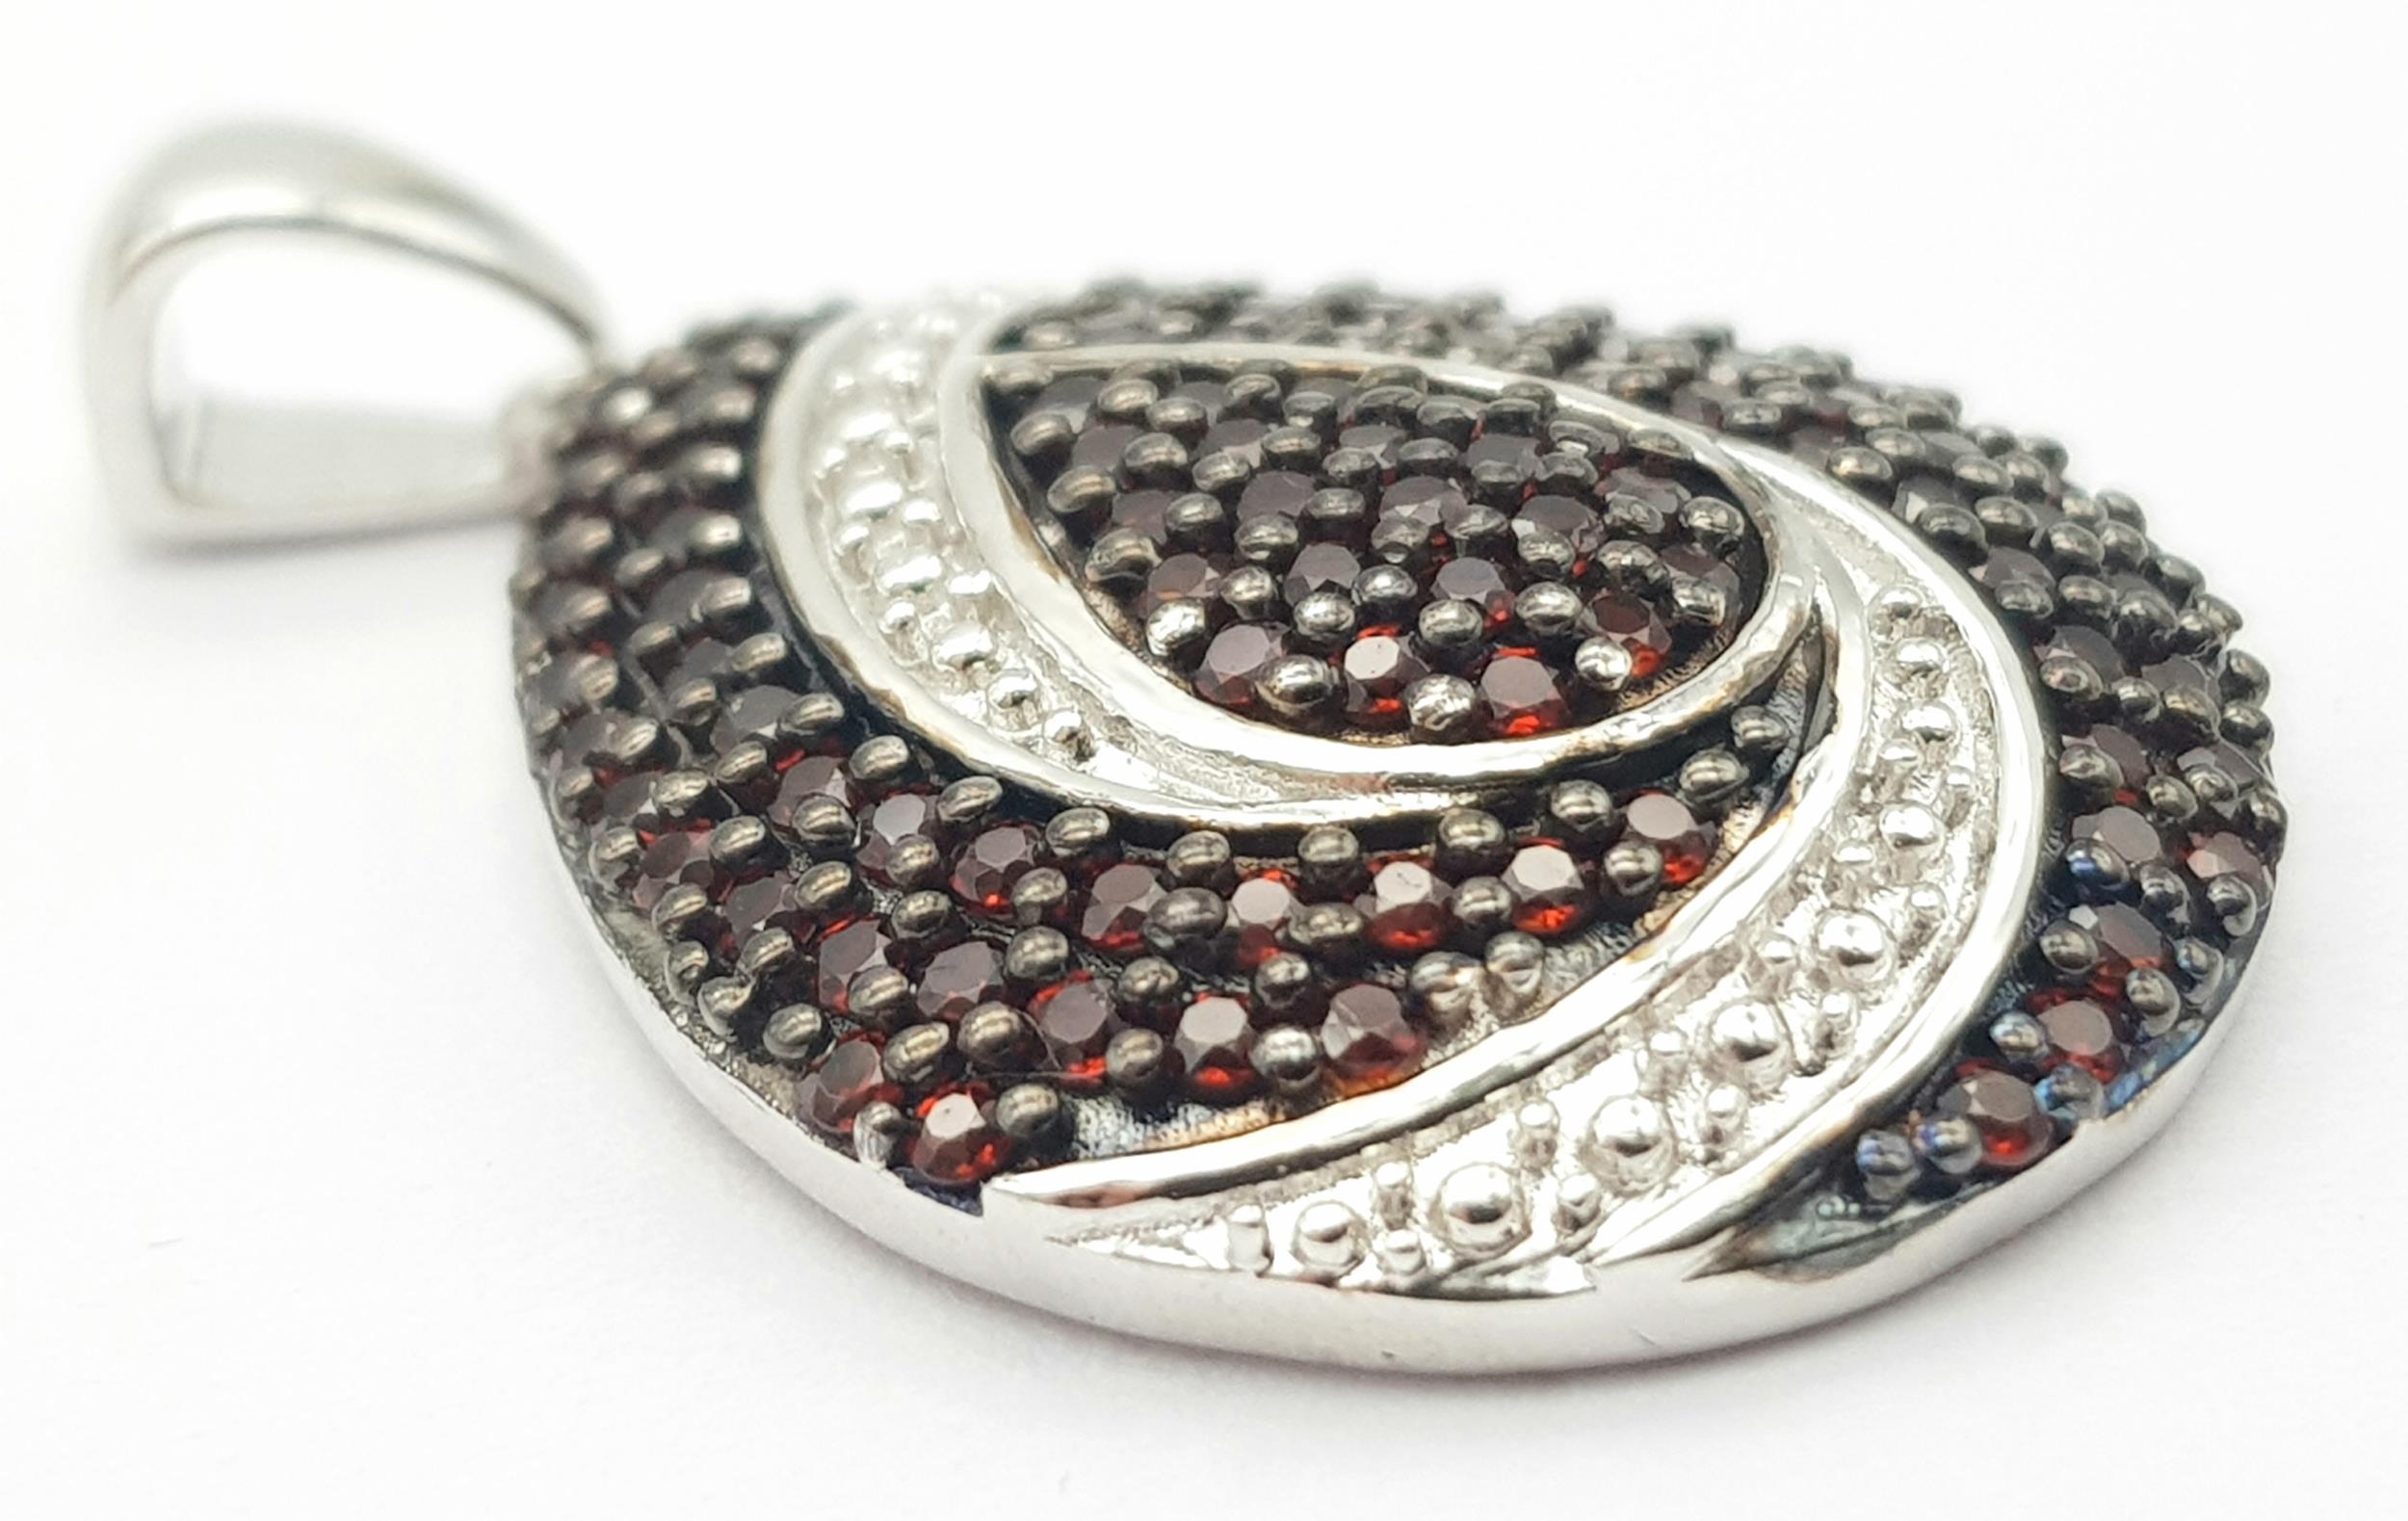 An Unworn, Fully Certified Limited Edition (1 of 50), Sterling Silver and Anthill Garnet Pendant. - Image 2 of 7